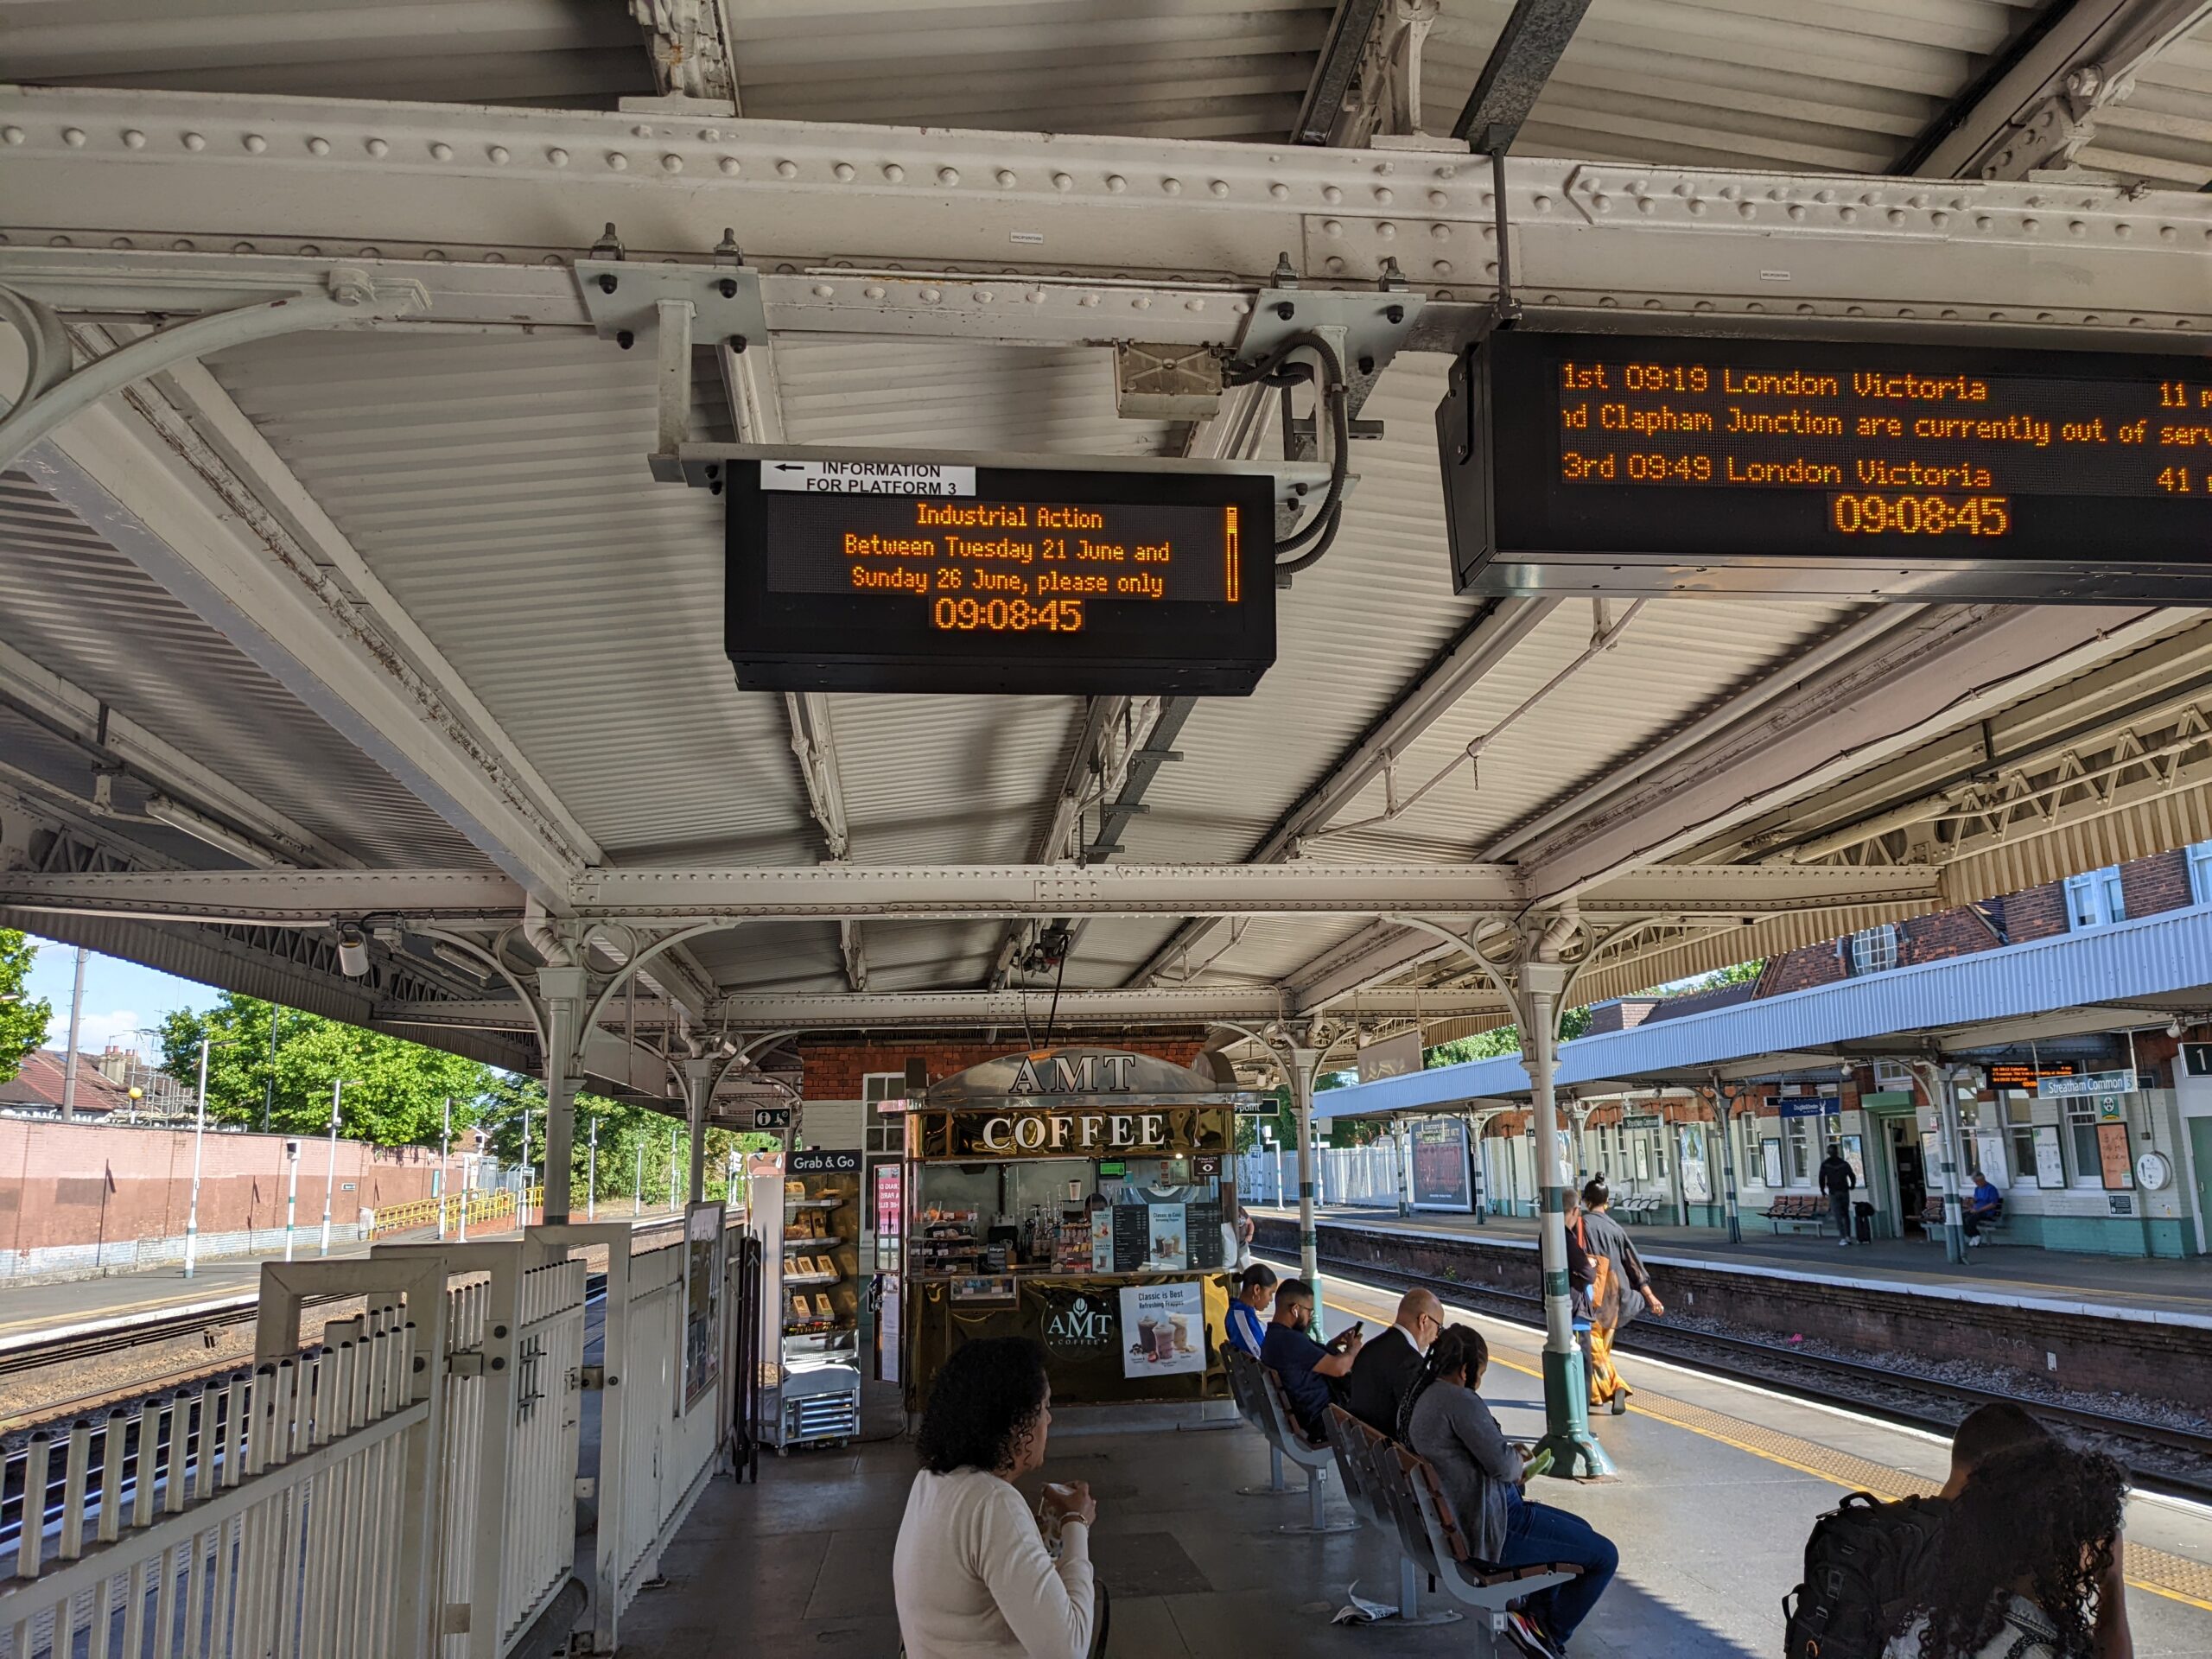 Rail station platform with overhead sign warning of industrial action